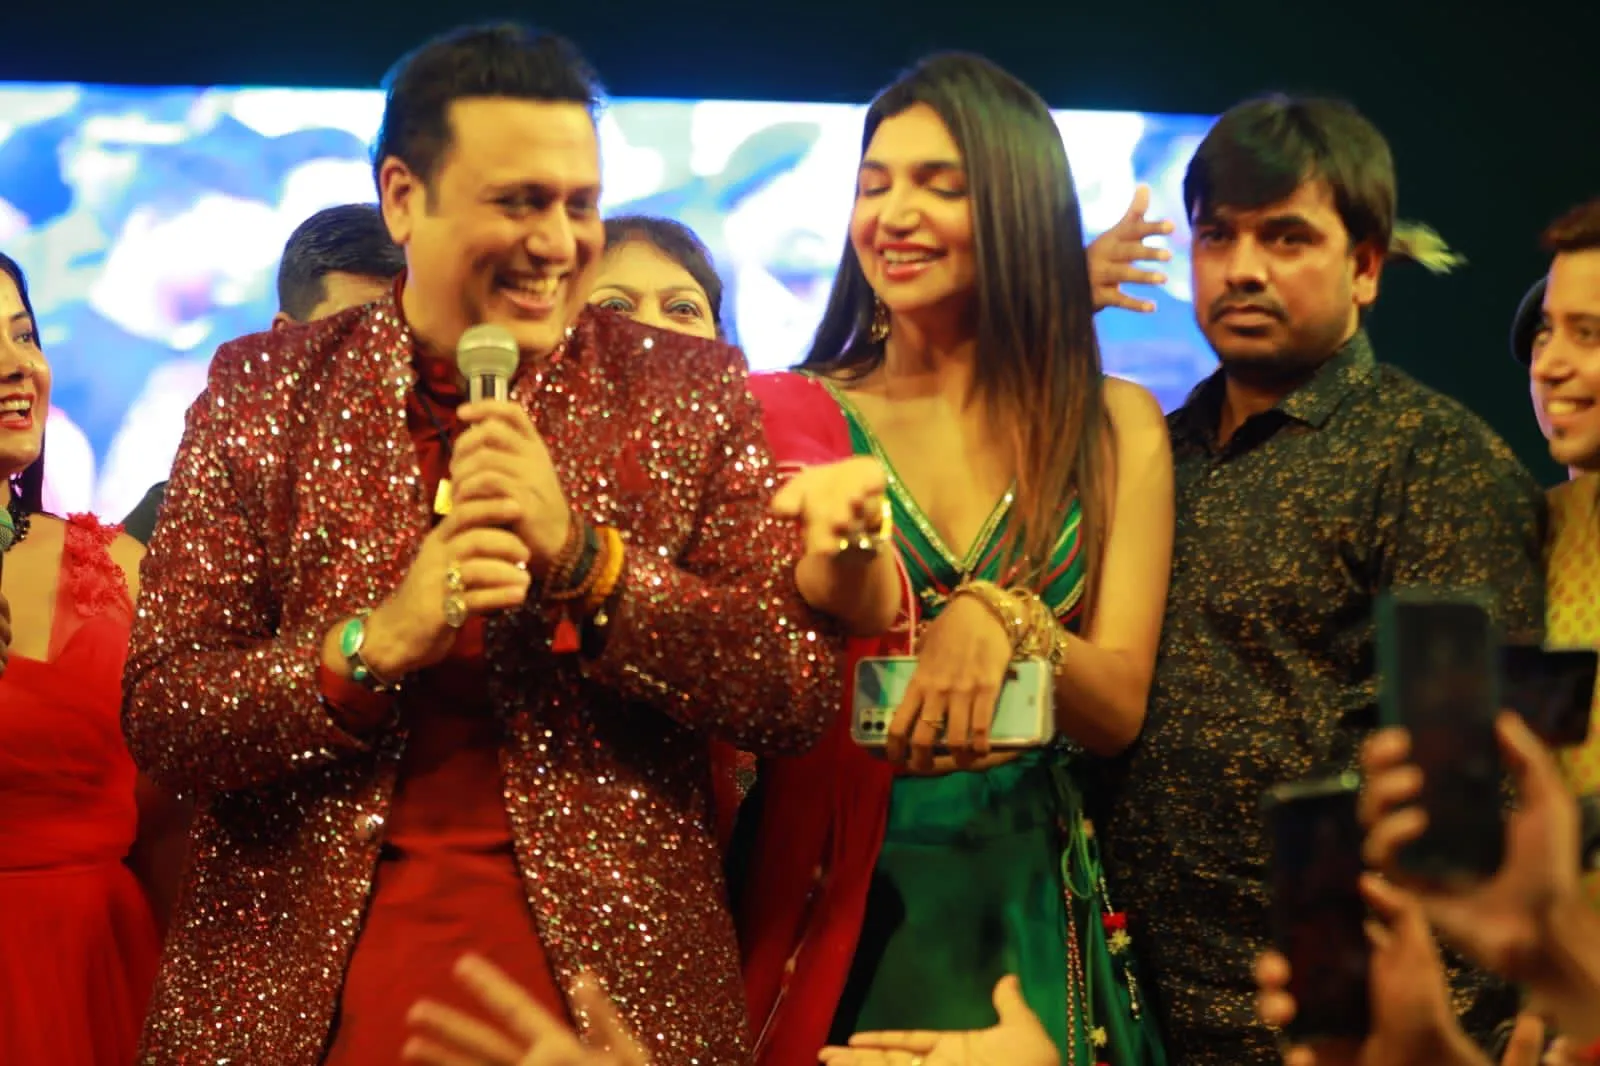 Govinda Ji is a mentor to me and I learnt many garba steps from him says Kriti Verma (3)